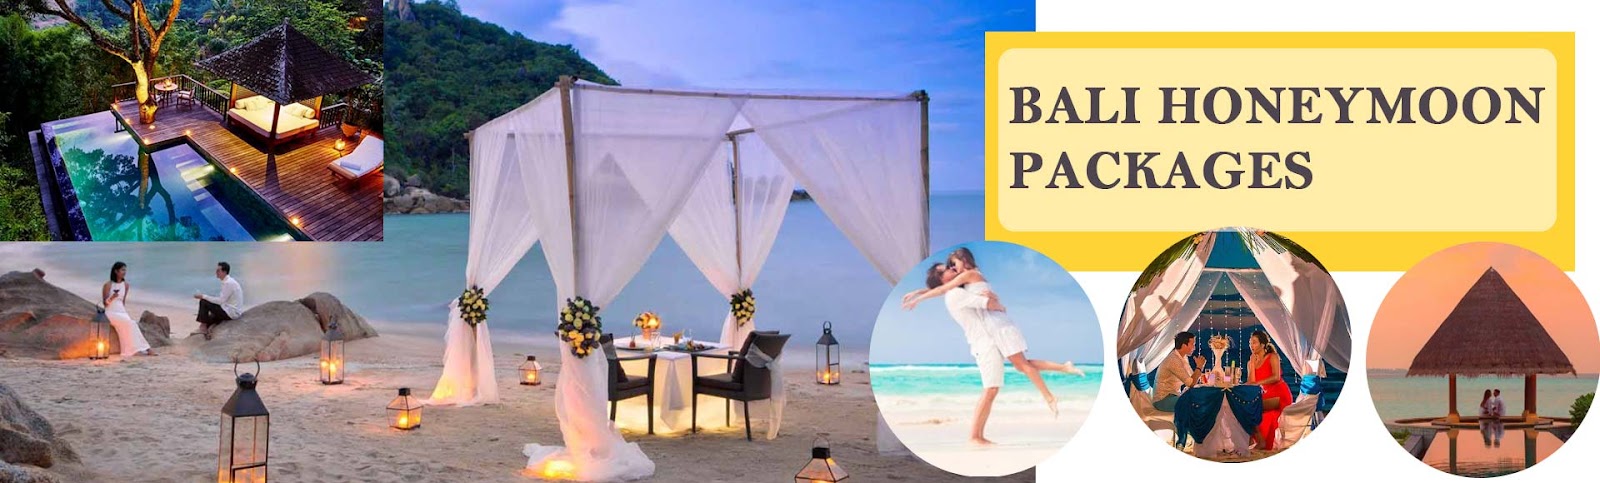 Cheapest Bali tour packages from Delhi are among are the most requested destinations for honeymooners and holiday makers.  Travel Ginie Tours